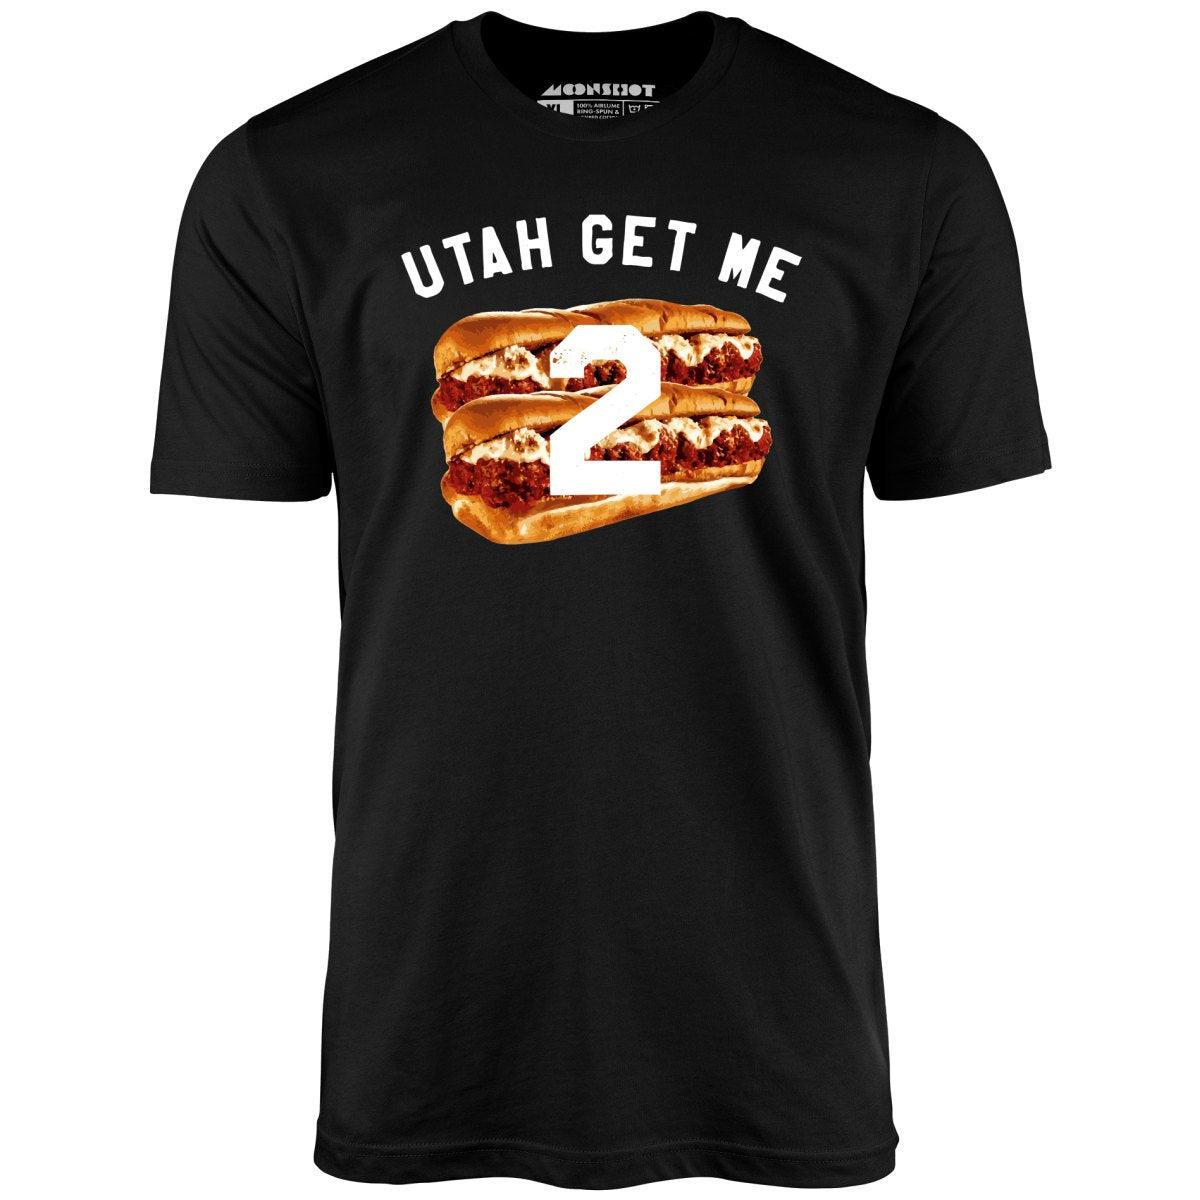 Utah Get Me Two - Meatball Subs - Unisex T-Shirt